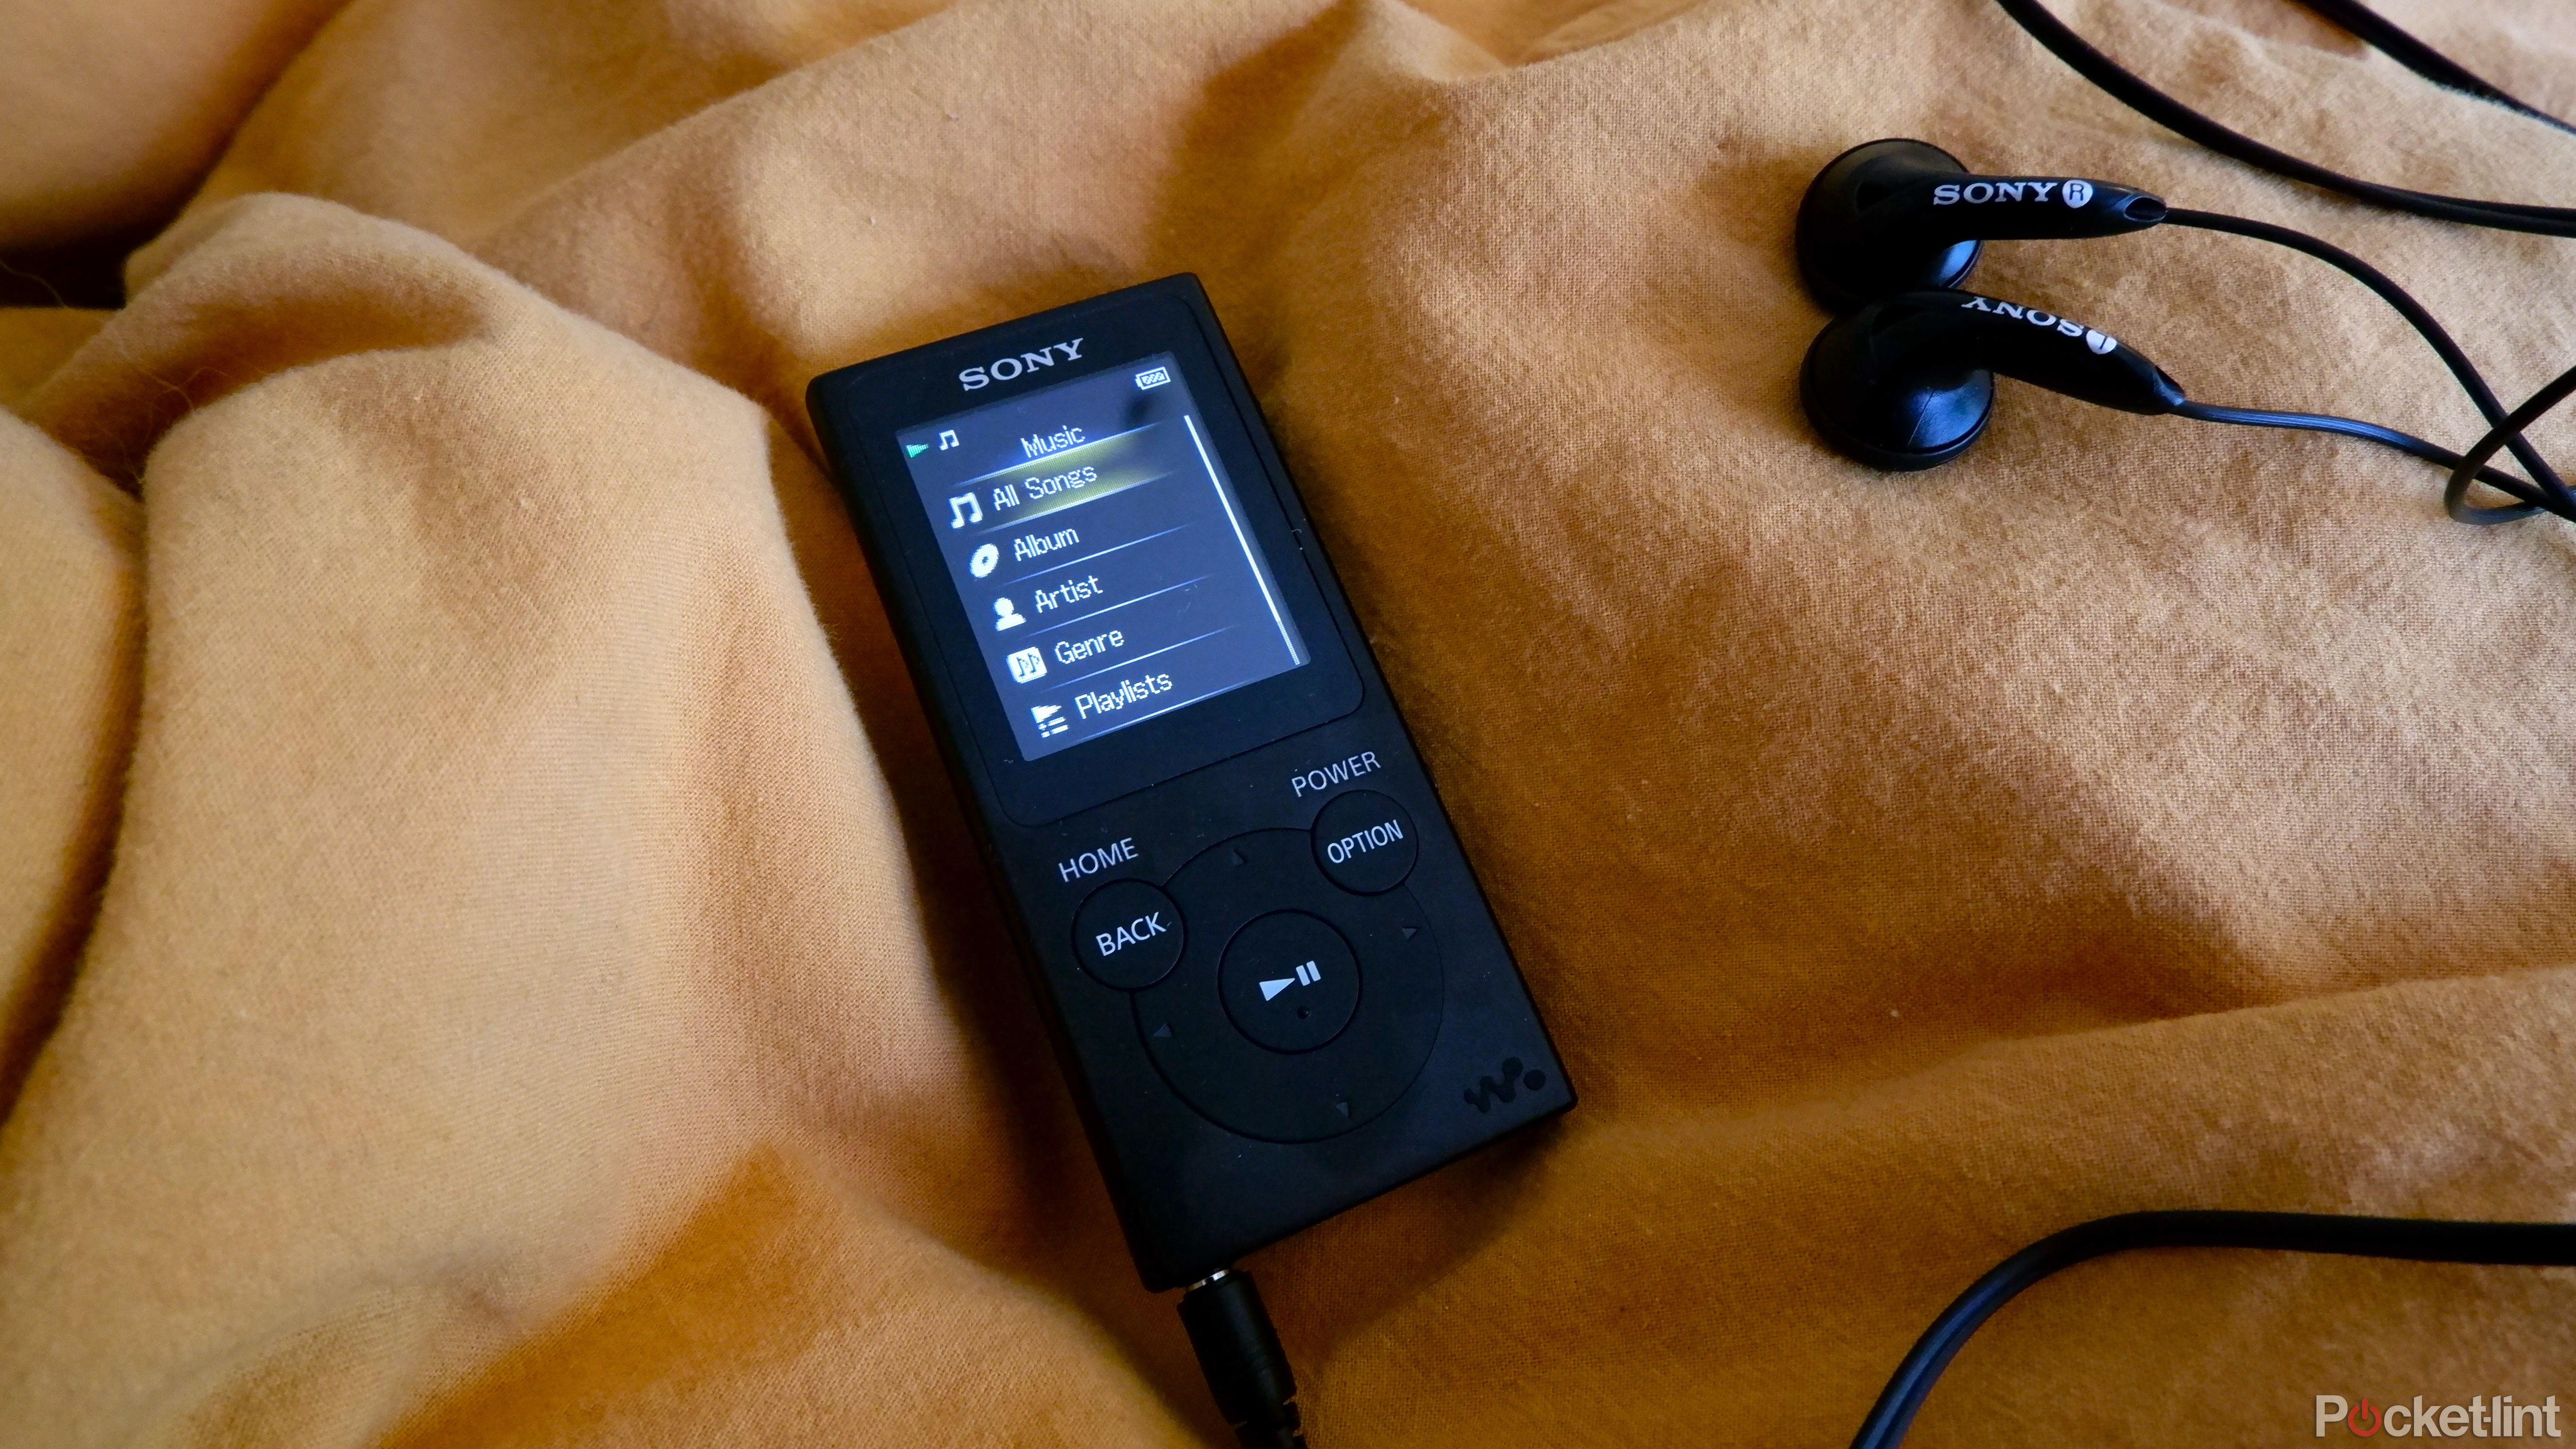 A Sony Walkman resting on a yellow sheet with the earbuds plugged in, showing the music menu.